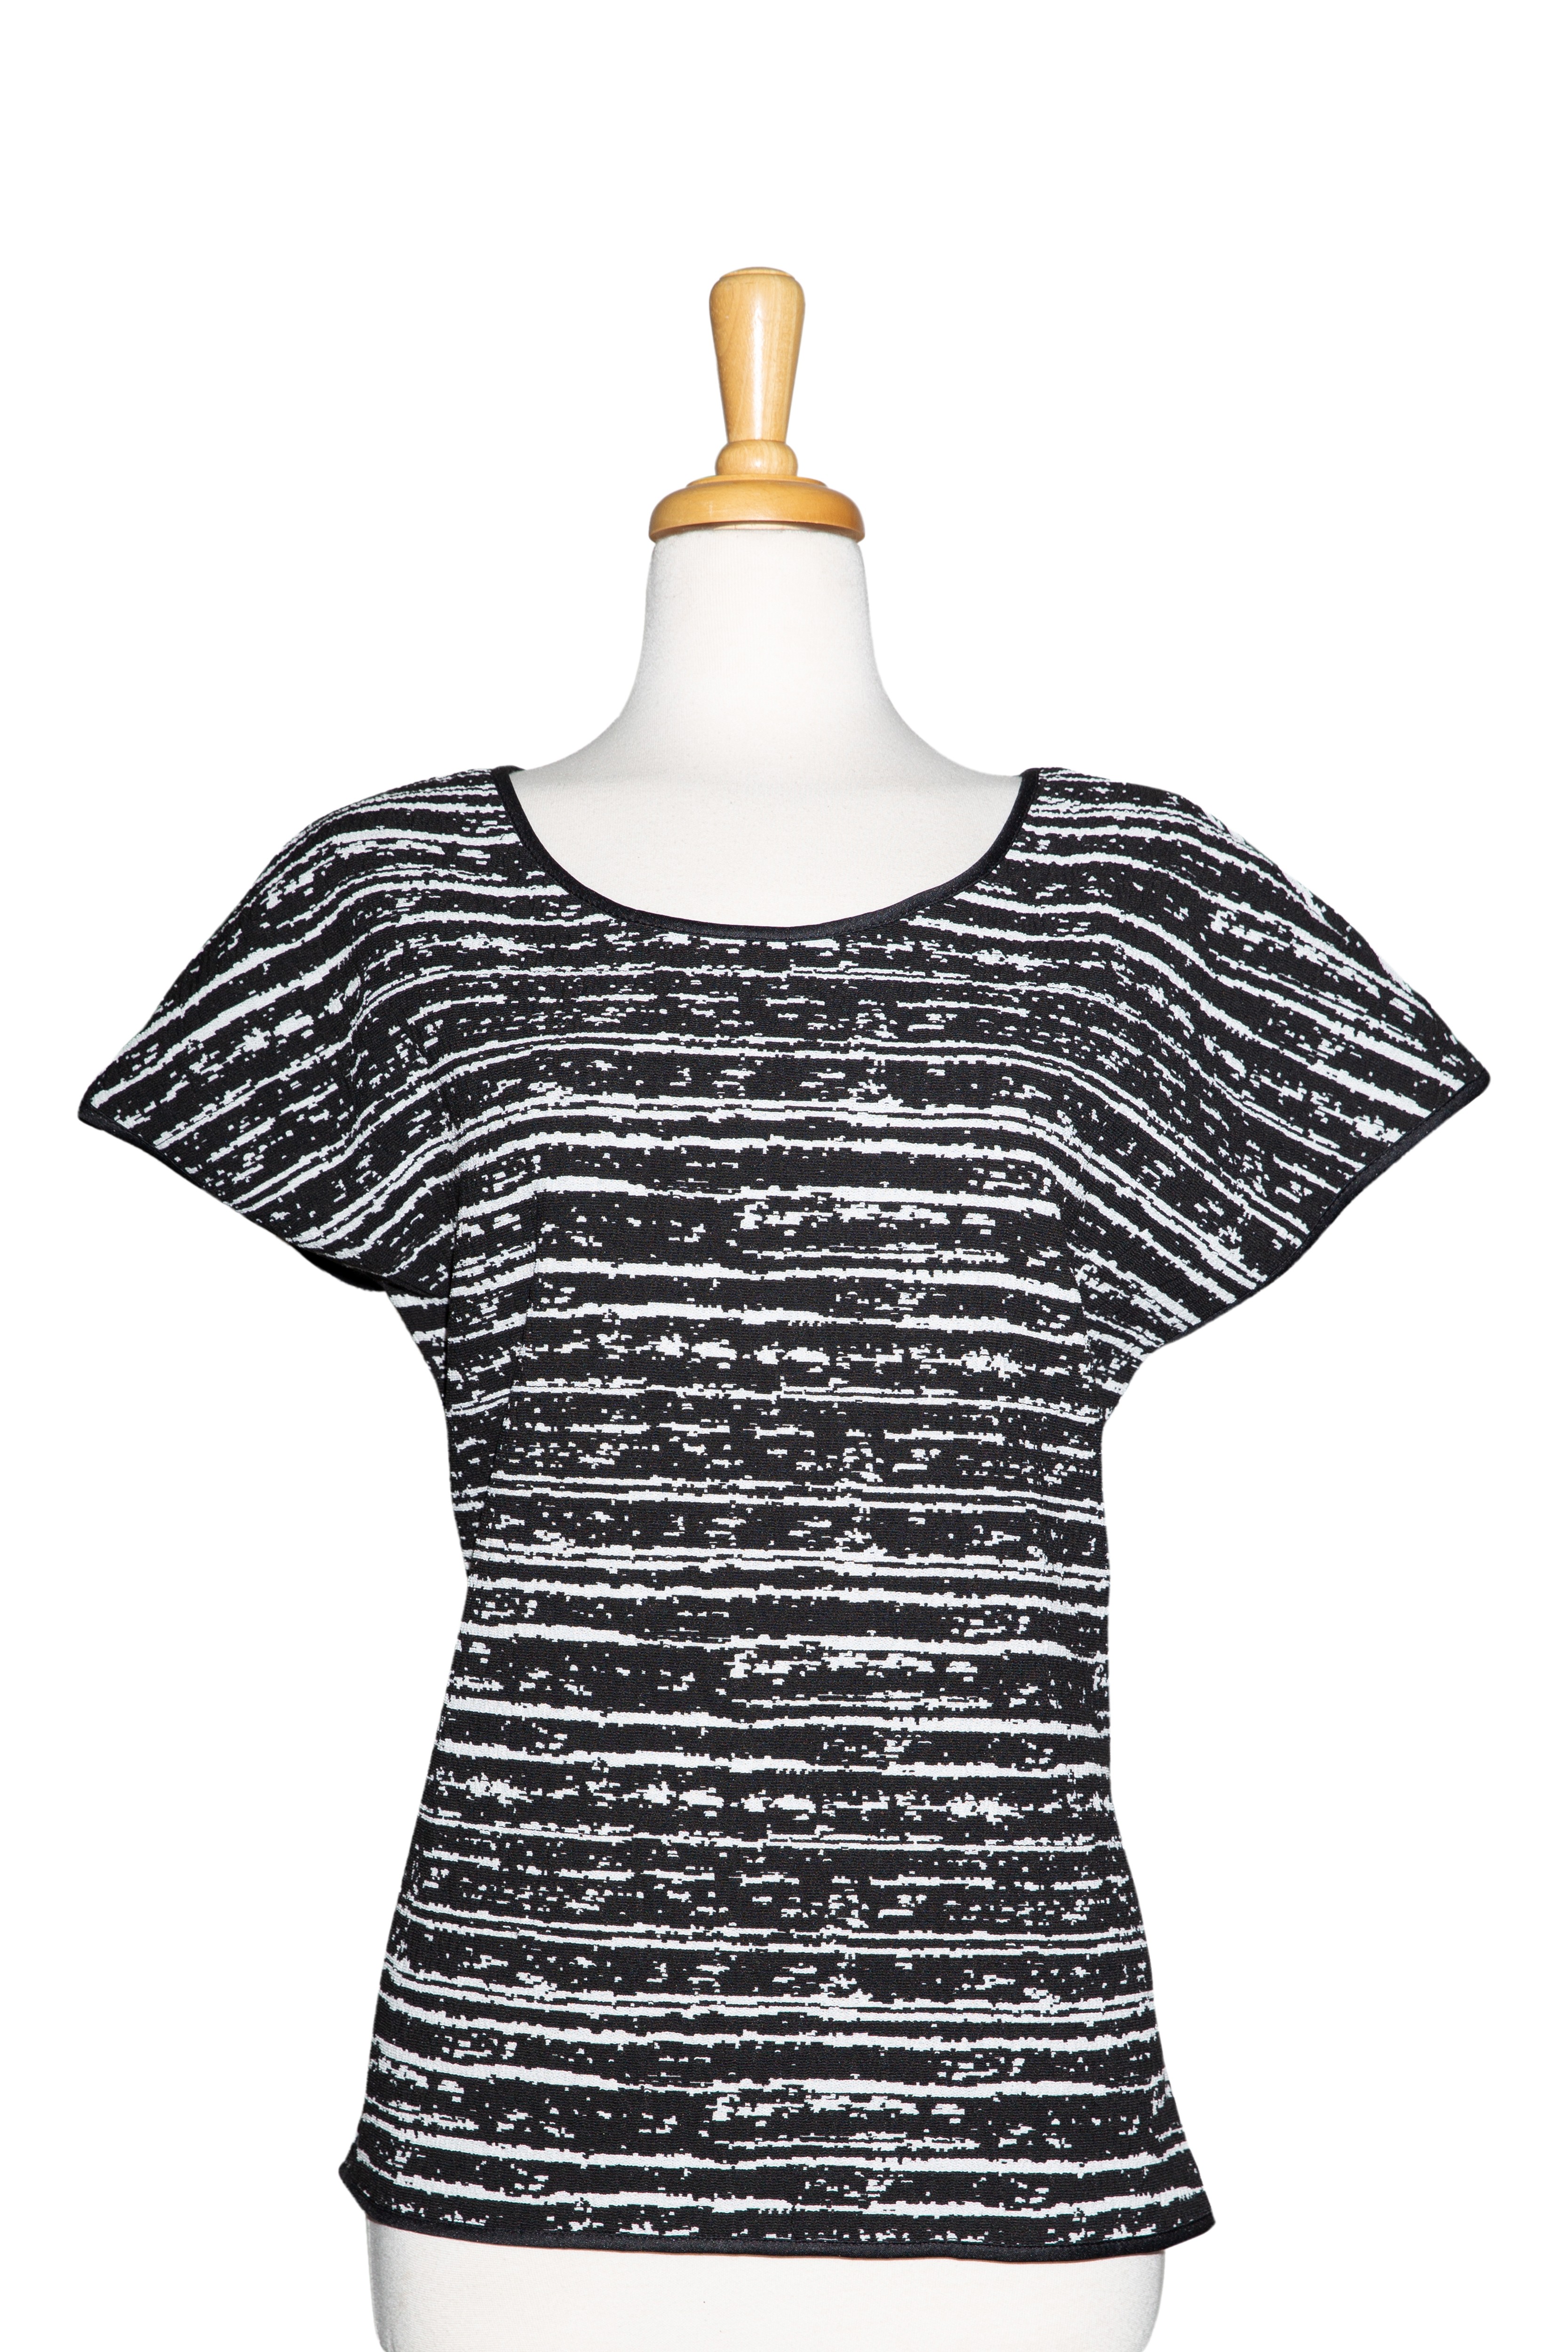 Plus Size Black and White Tweed Knit Short Sleeve Top